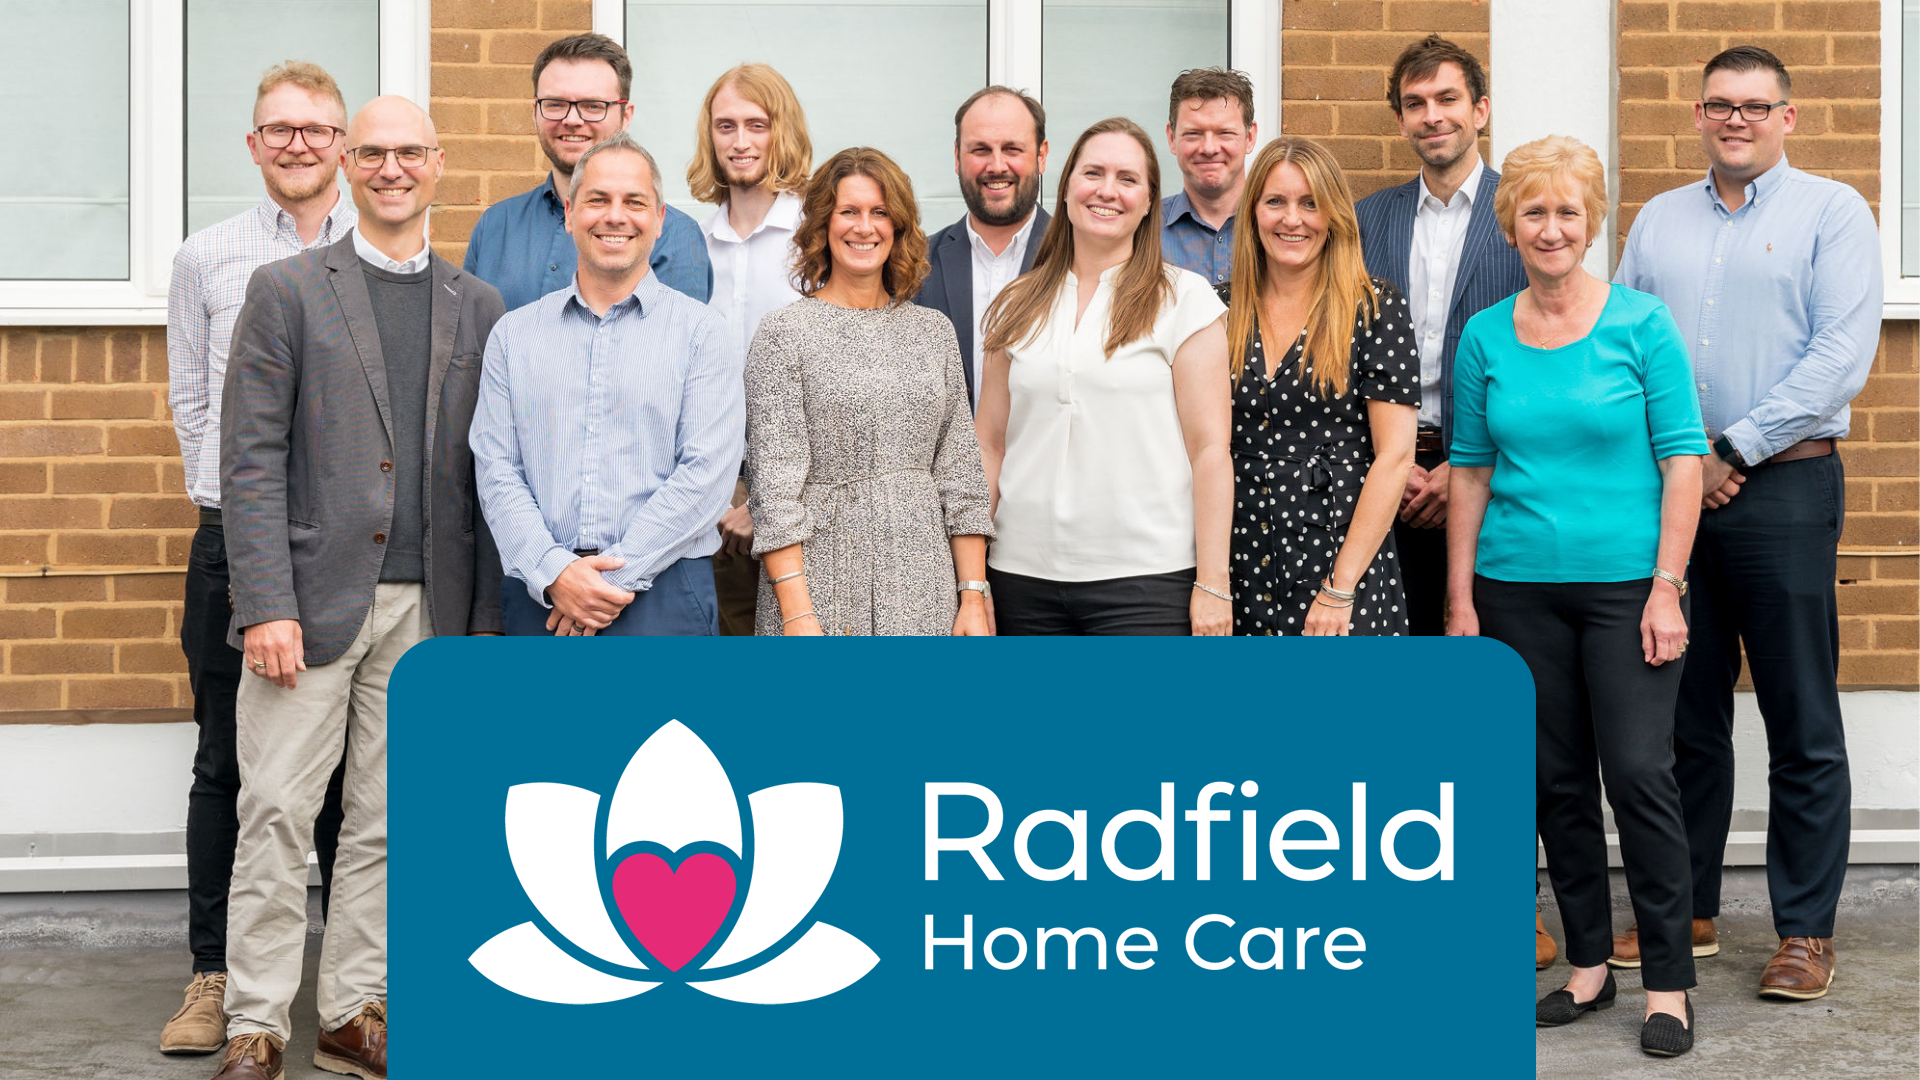 Radfield Home Care franchising launches fresh branding and new website